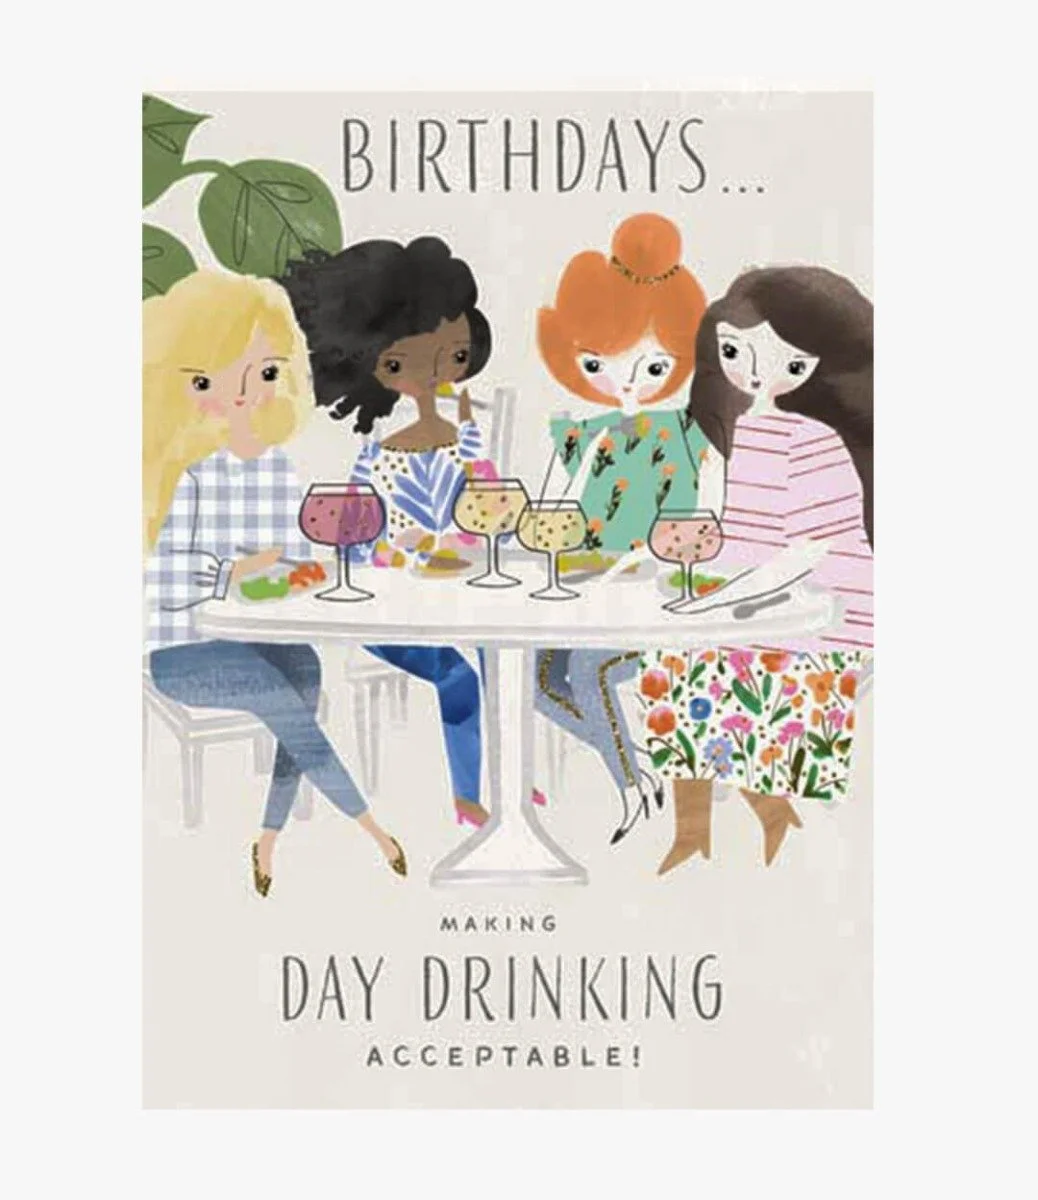 Birthdays Making Day Drinking Acceptable Greeting Card by Hey Girl